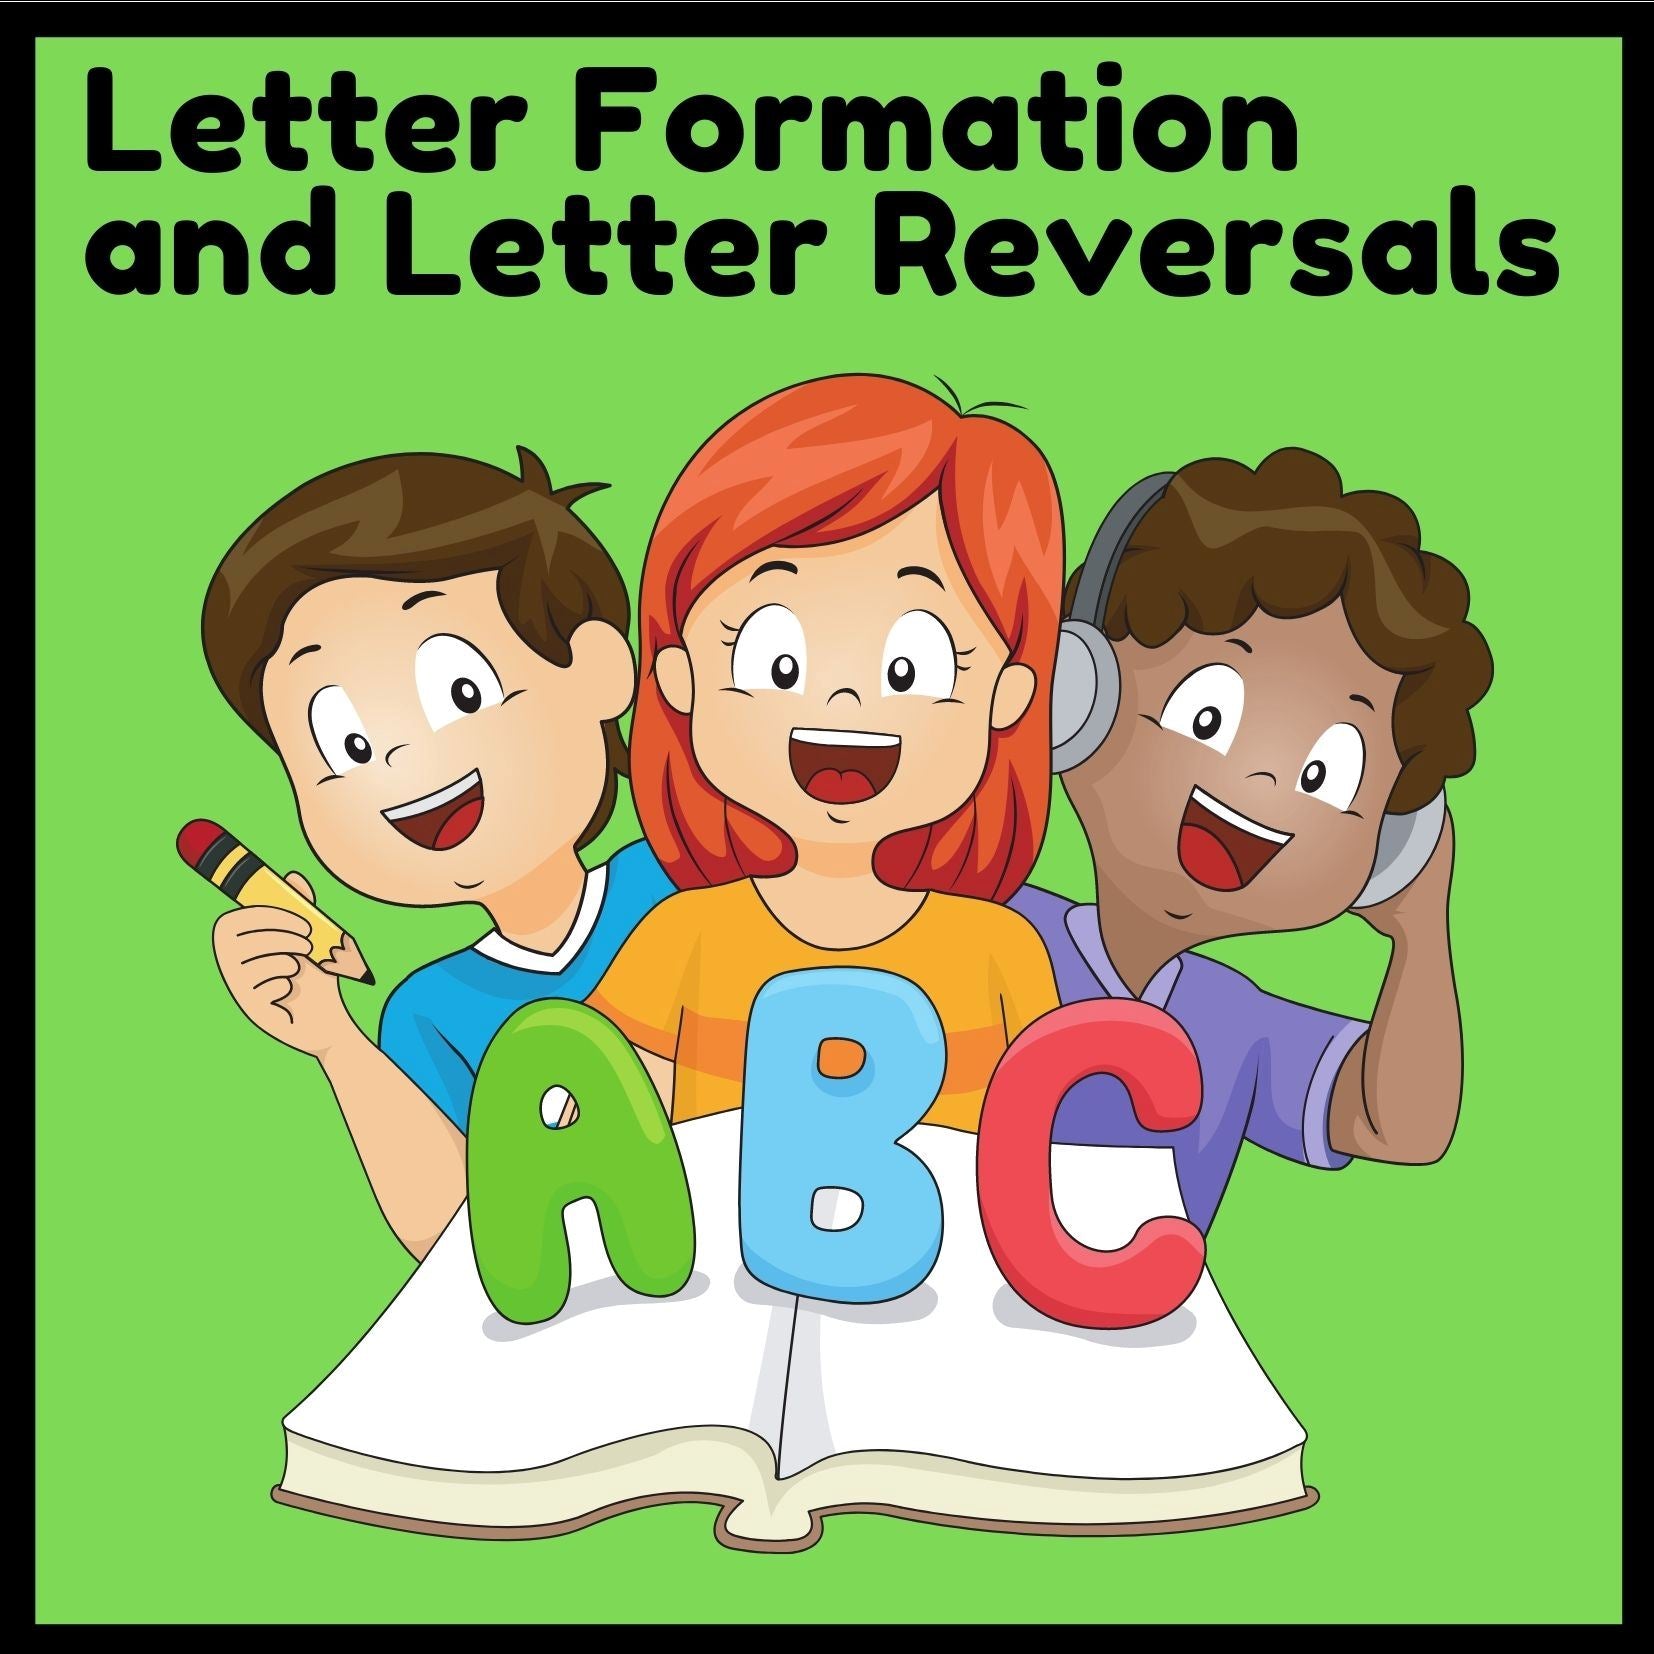 Letter Formation and Letter Reversals